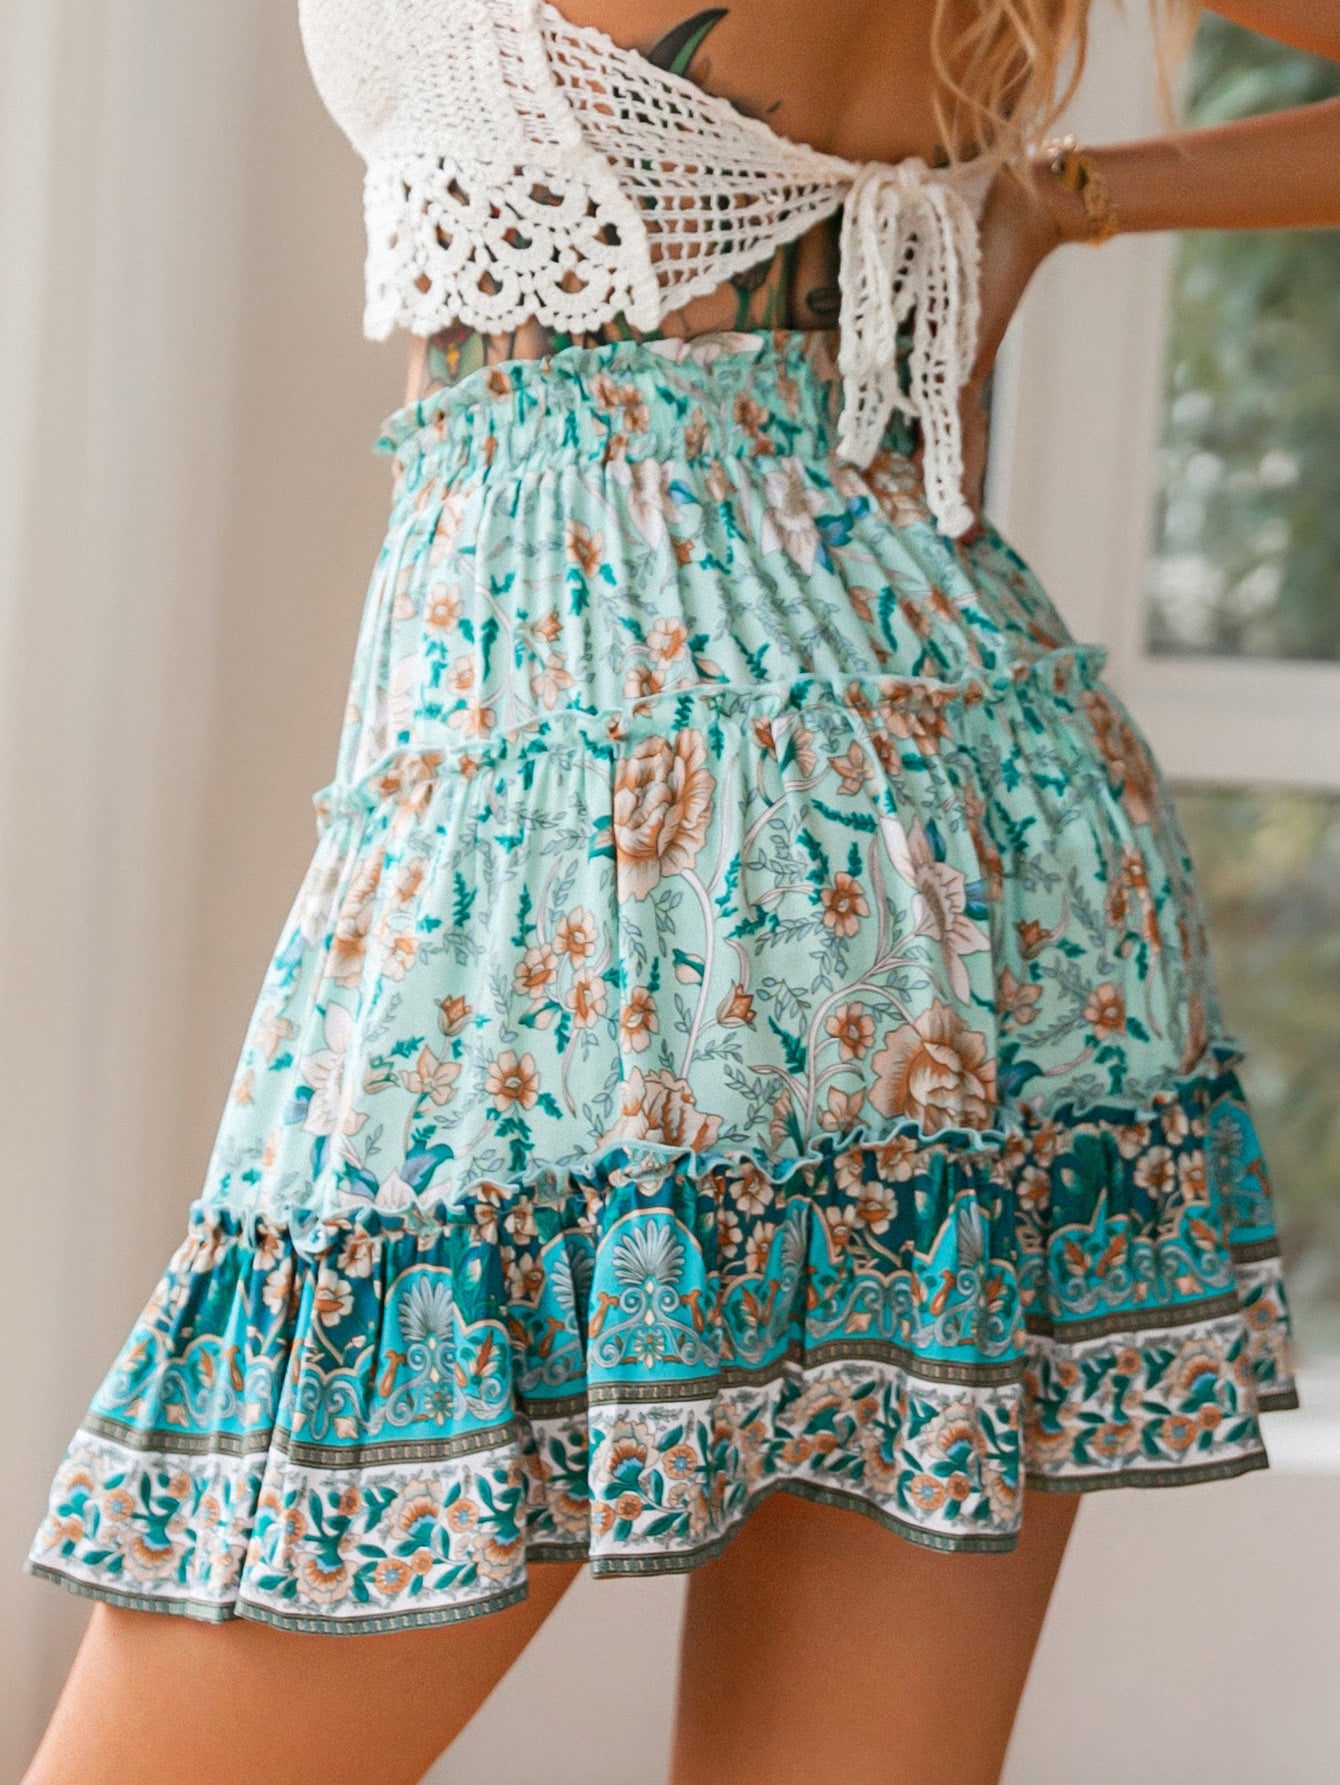 Floral Frill Trim: A Stylish Layered Skirt with Feminine Charm